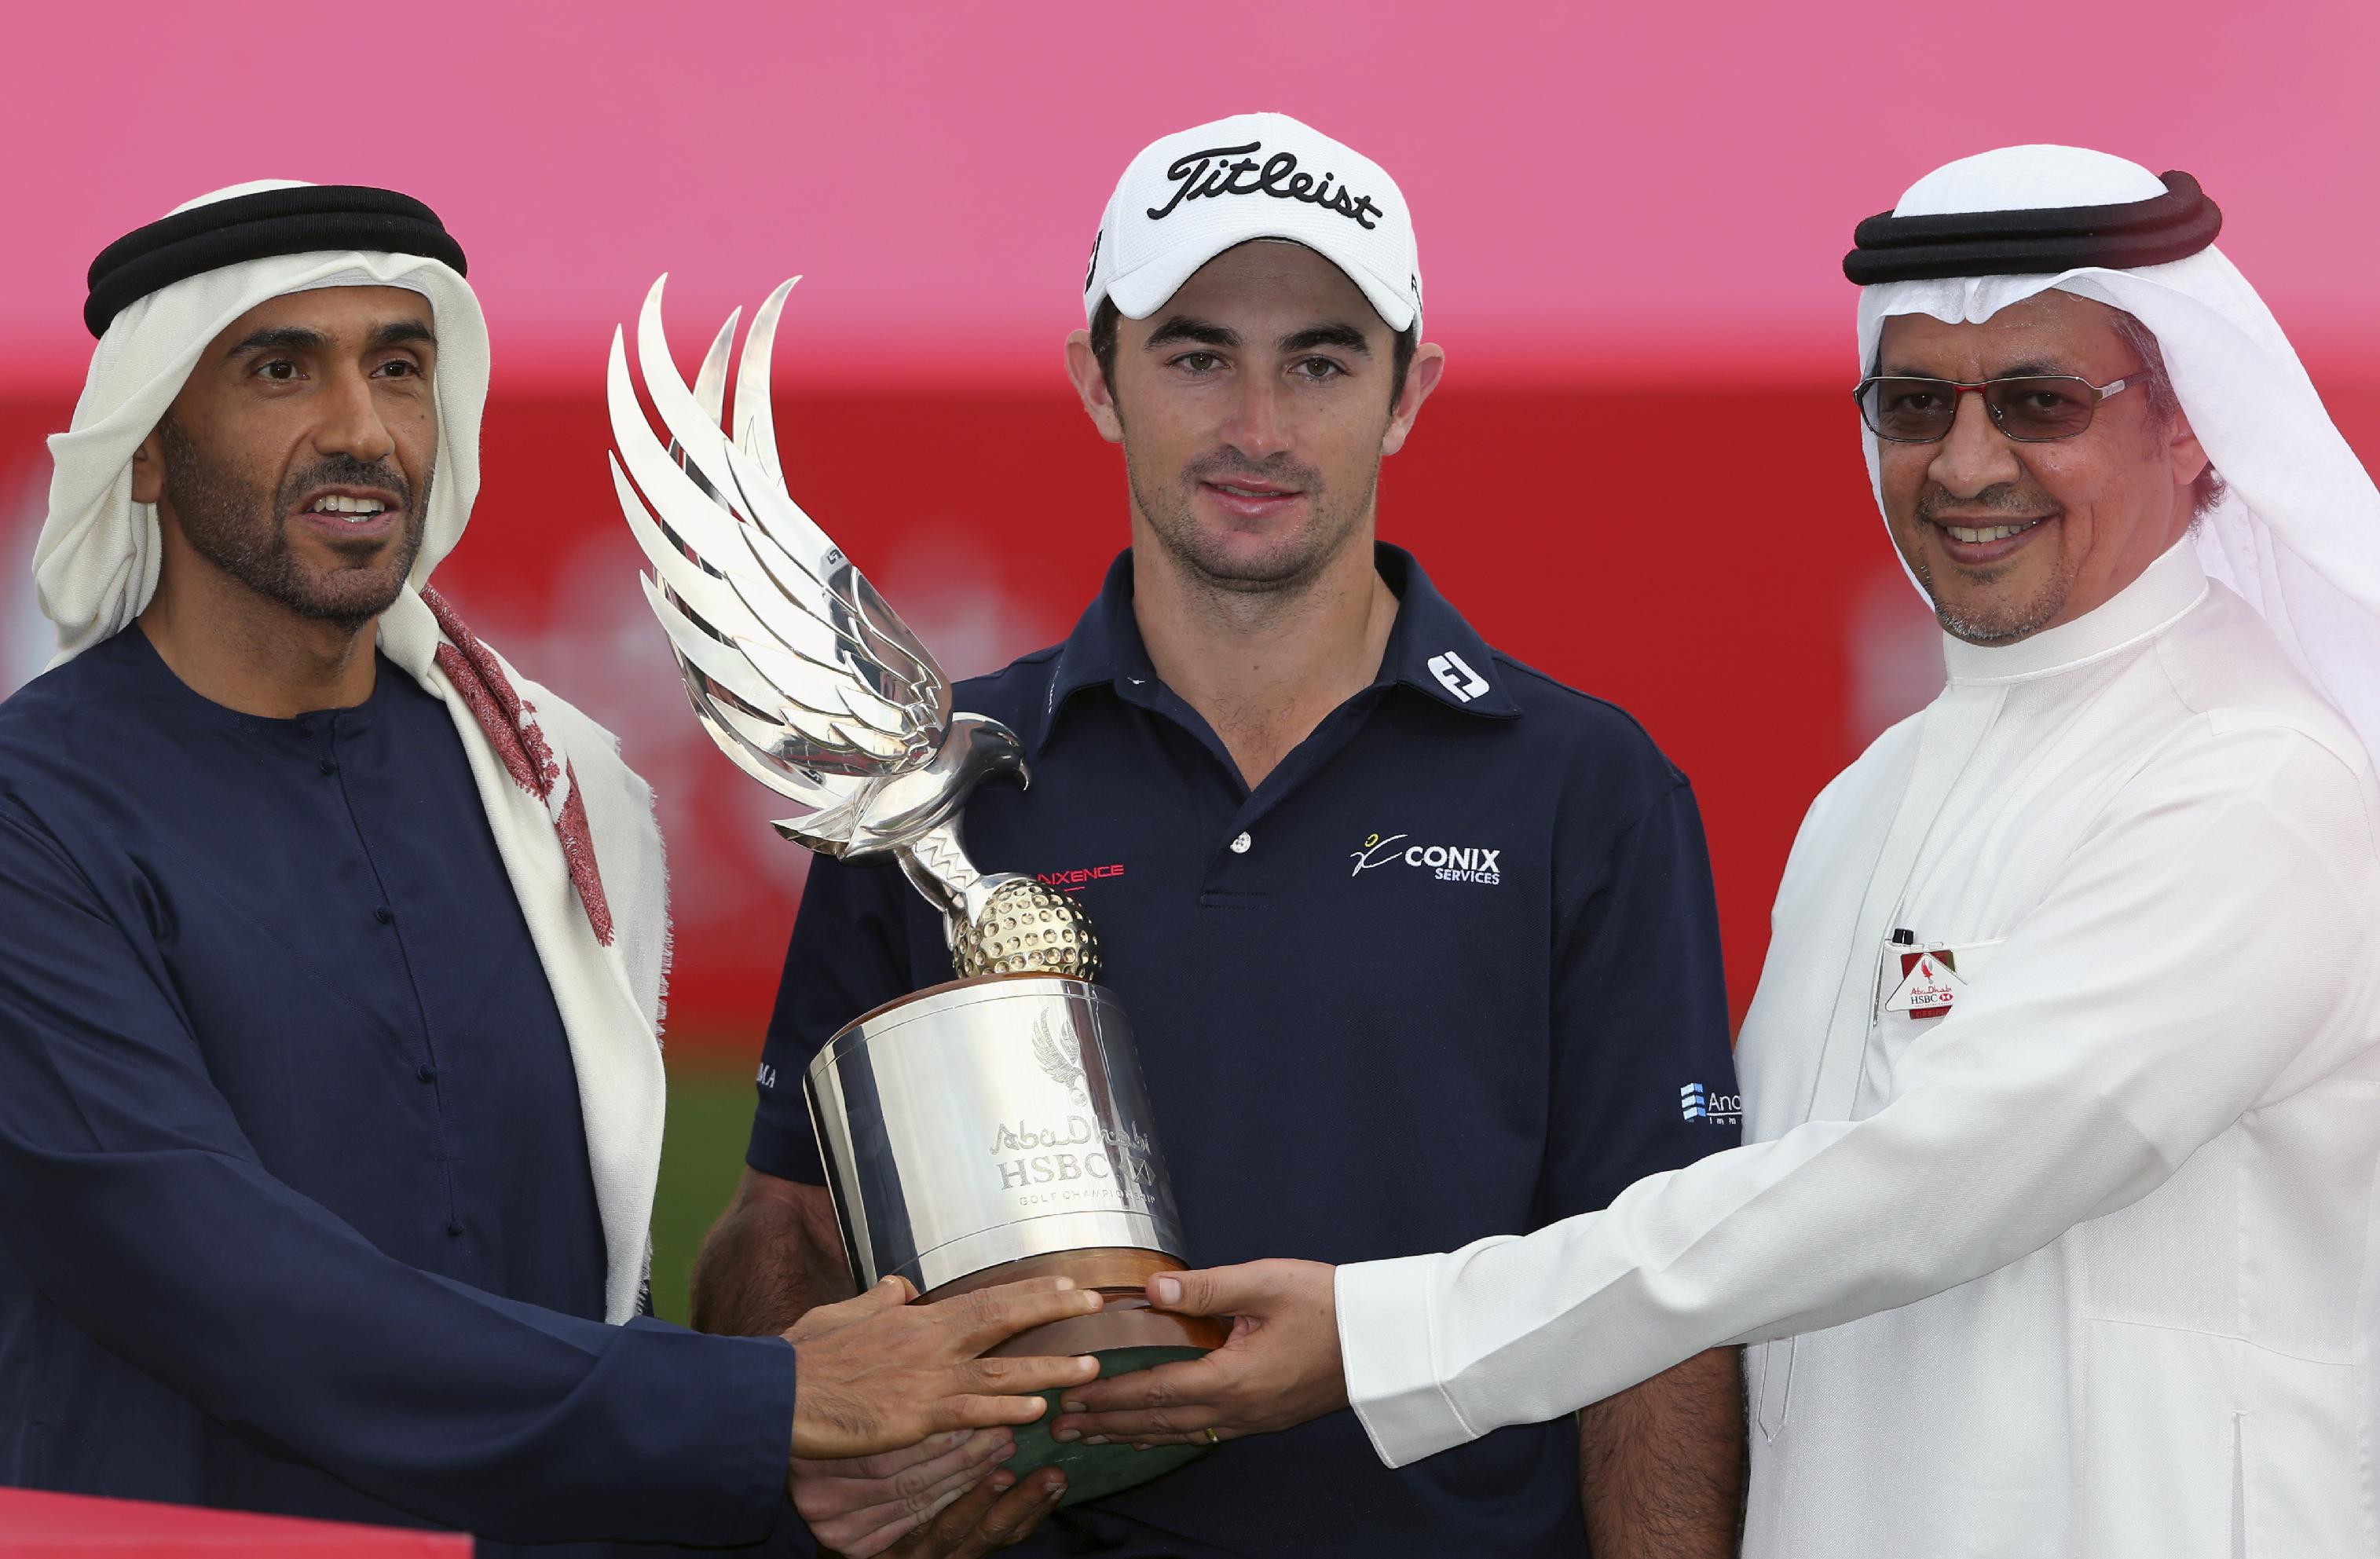 Gary Stal of France, center, receives the trophy from Sheikh Nahyan Bin Zayed Al Nahyan, chairman of the Abu Dhabi Sports Council, left, and Mohammad Al-Tuwaijri, chief executive of HSBC Middle East and North Africa, after Stal wins the HSBC Golf Championship in Abu Dhabi, United Arab Emirates, Sunday, Jan. 18, 2015. (AP Photo/Kamran Jebreili)